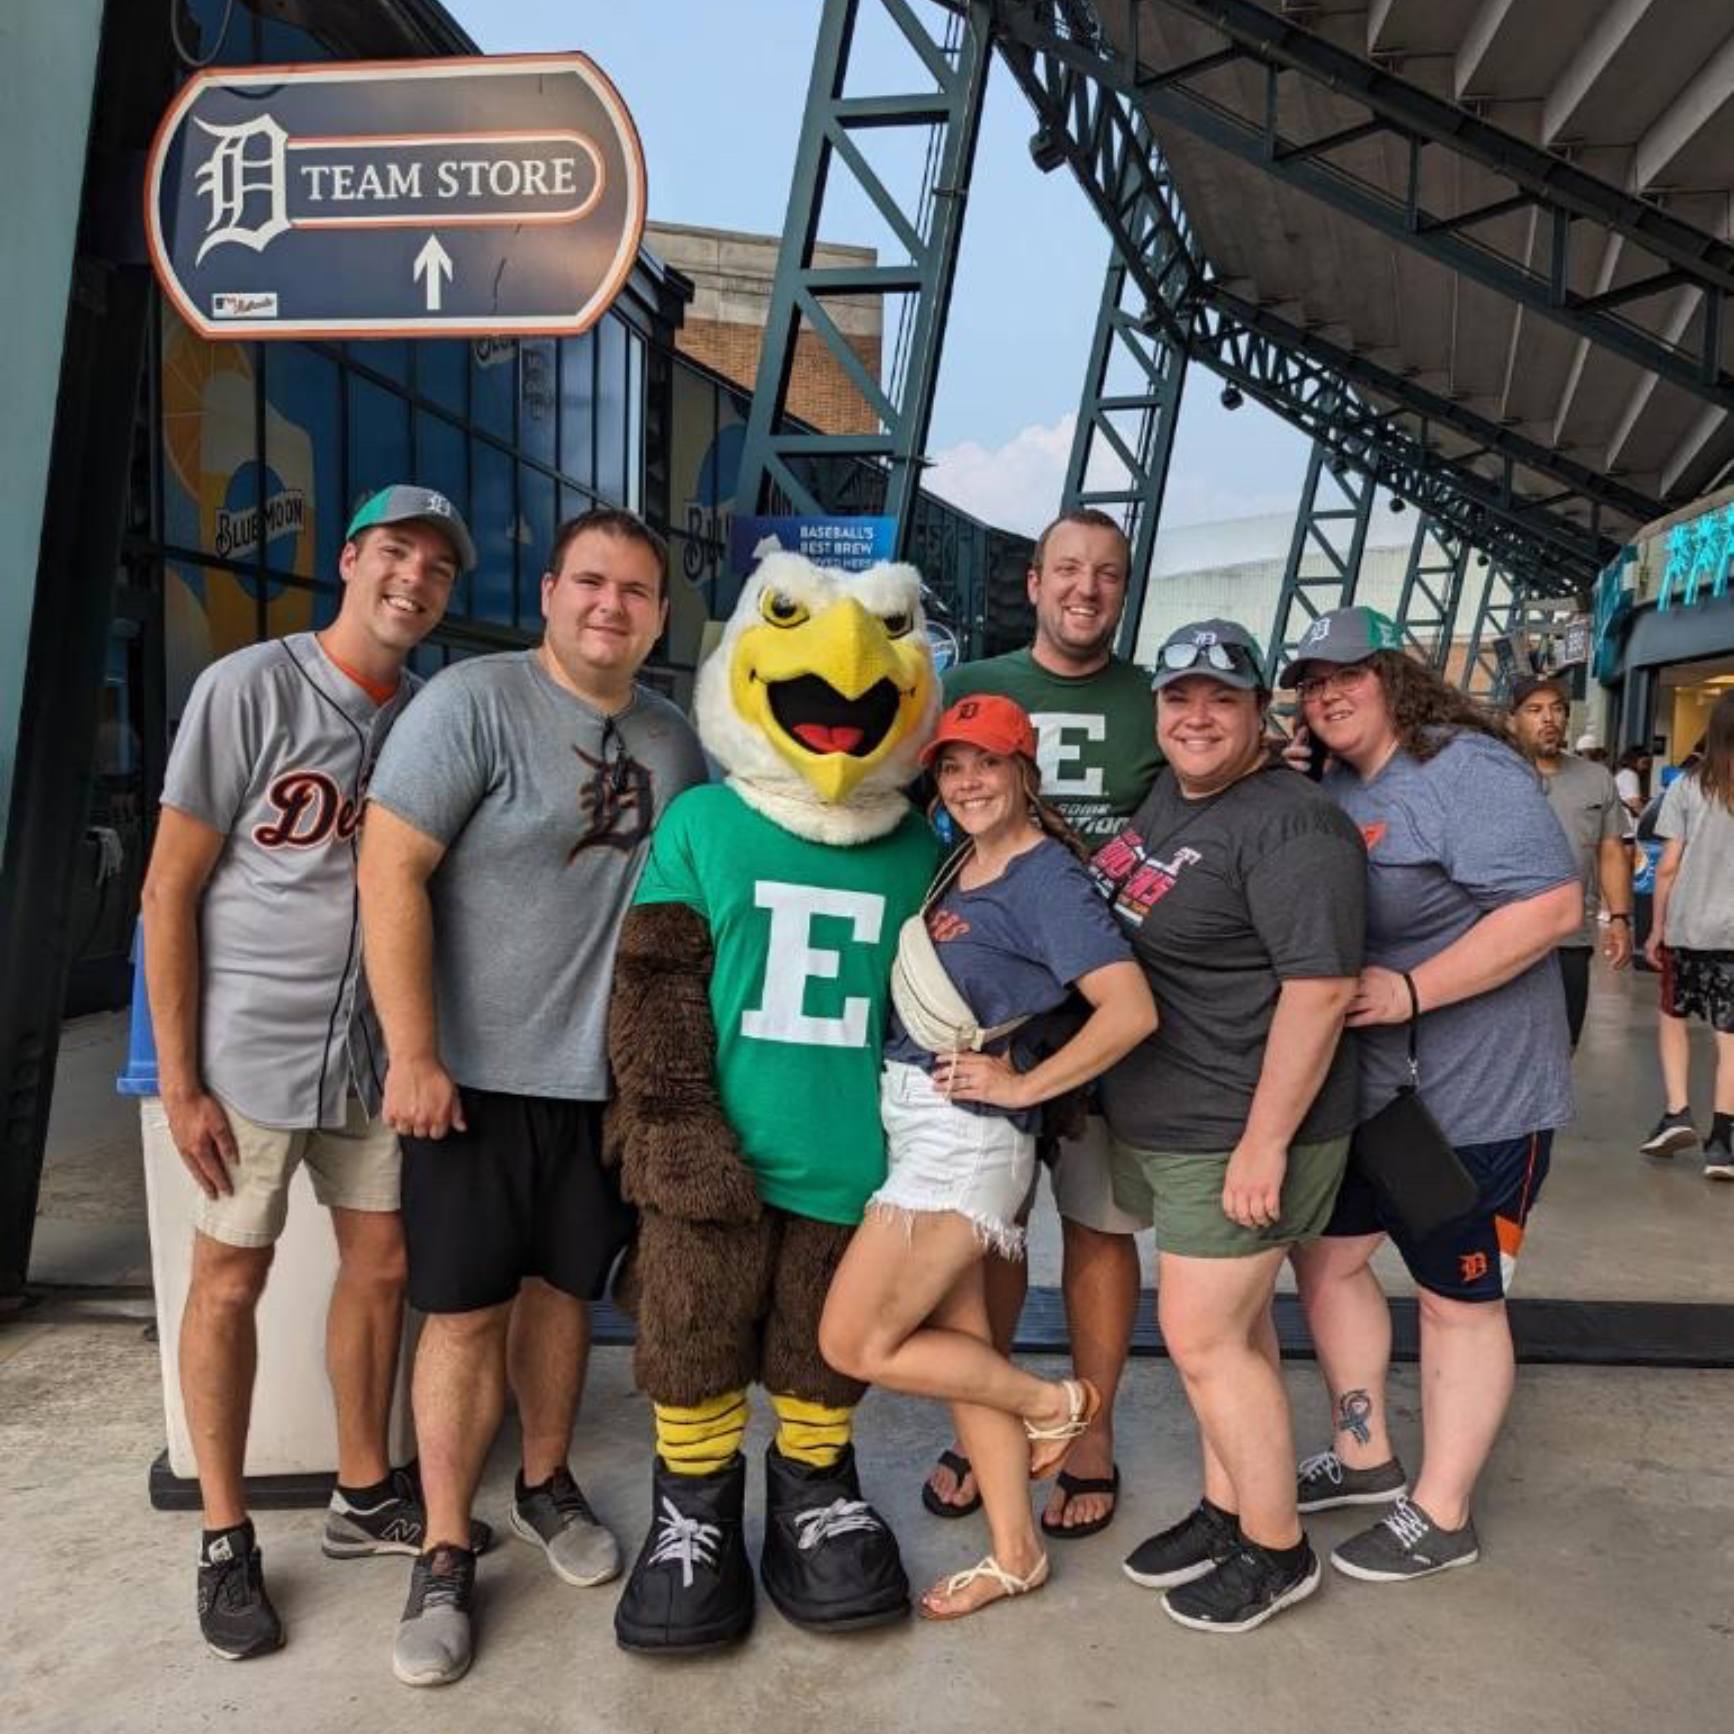 Cheering on the Detroit Tigers with friends at the Eastern Michigan University themed night, and a special appearance by our favorite eagle, Swoop! 